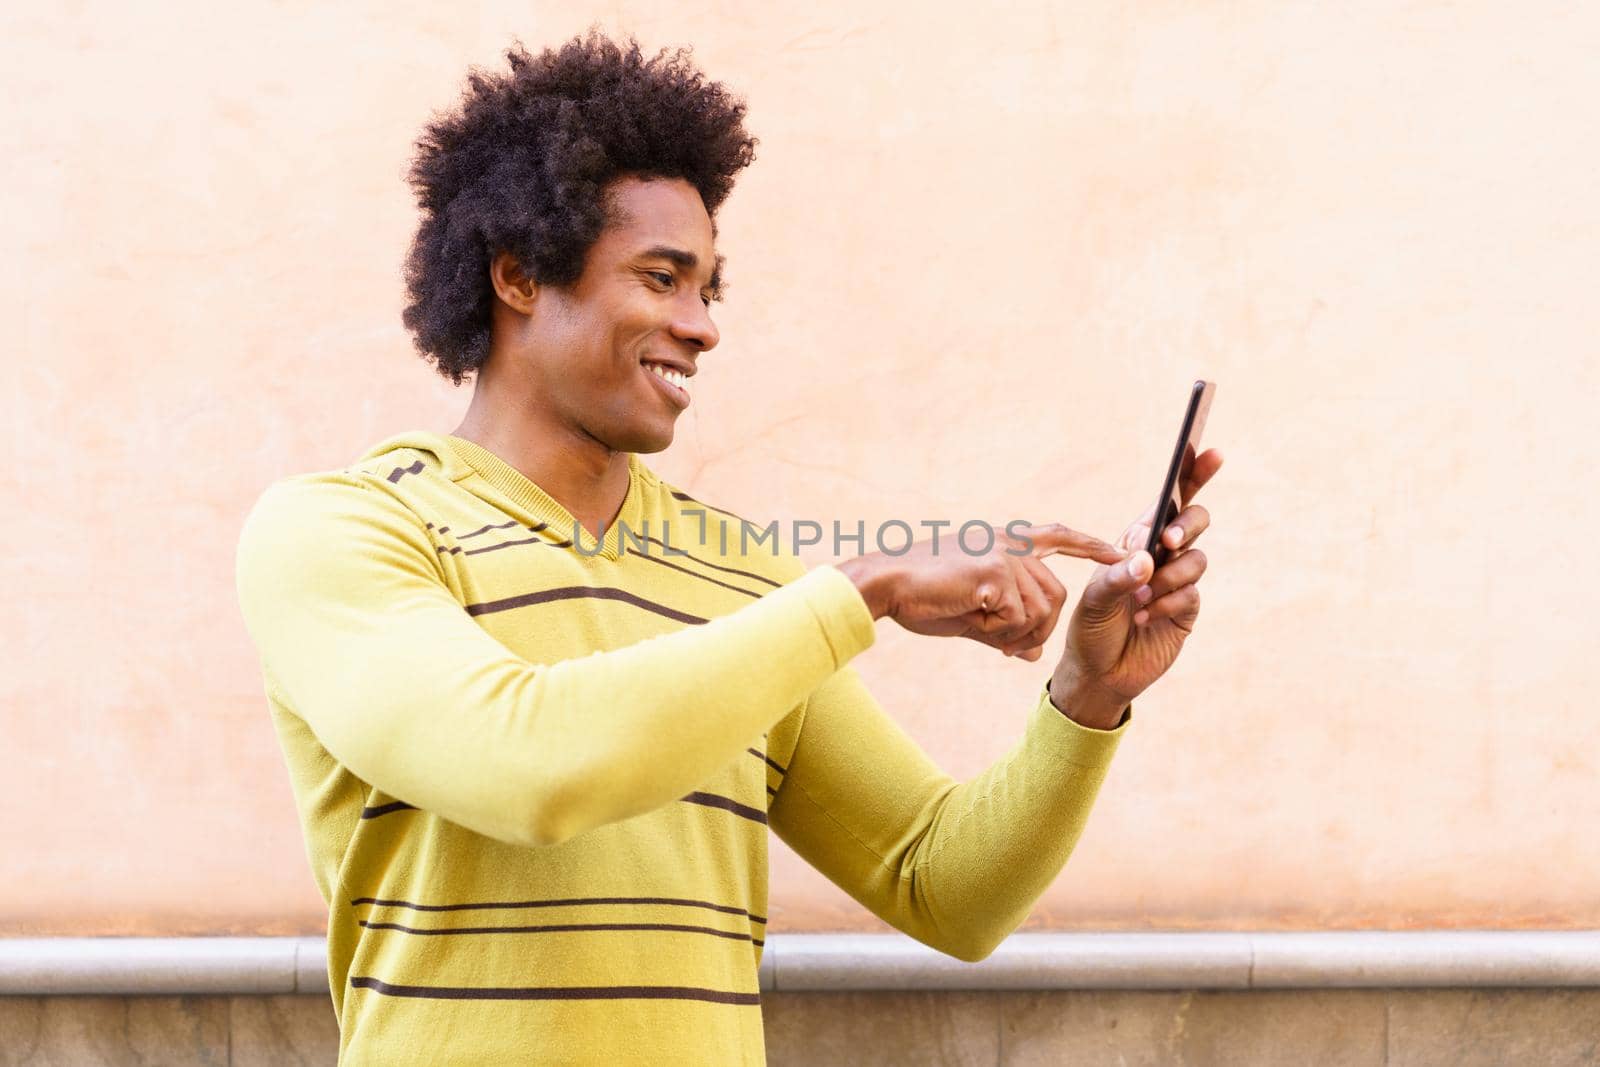 Black man with afro hair and headphones using smartphone in urban background.